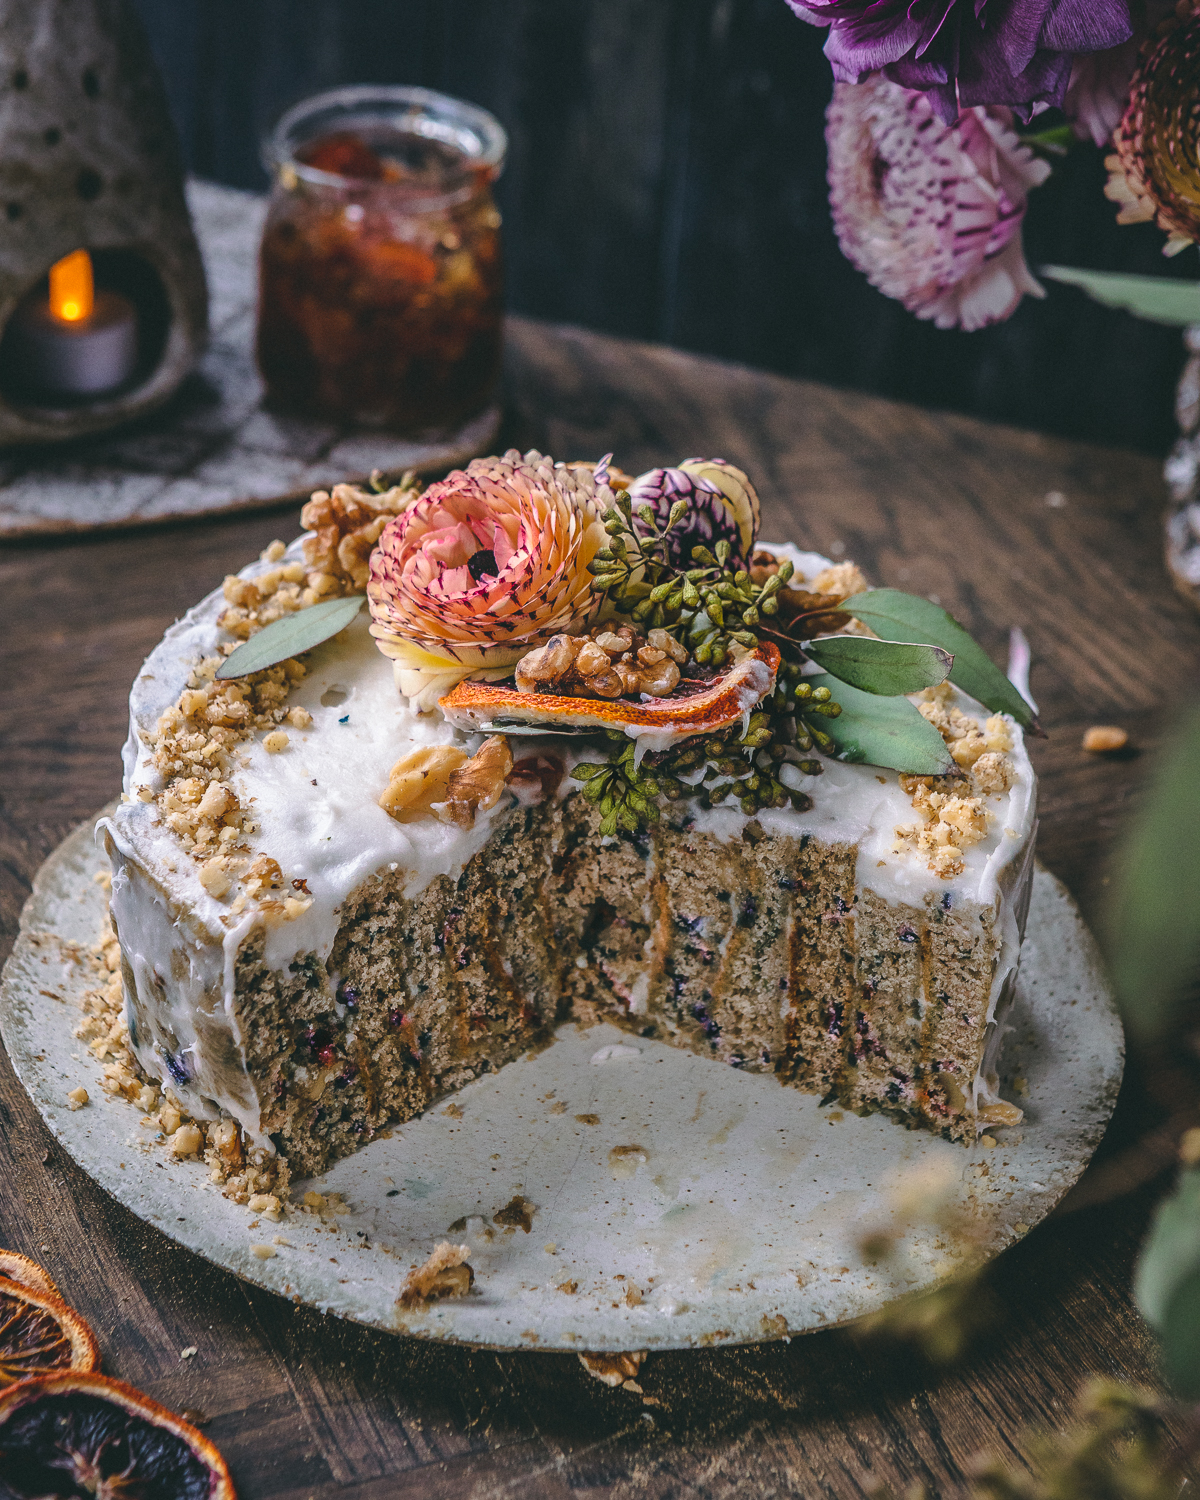 Celebrate carrots with this delicious carrot cake cake